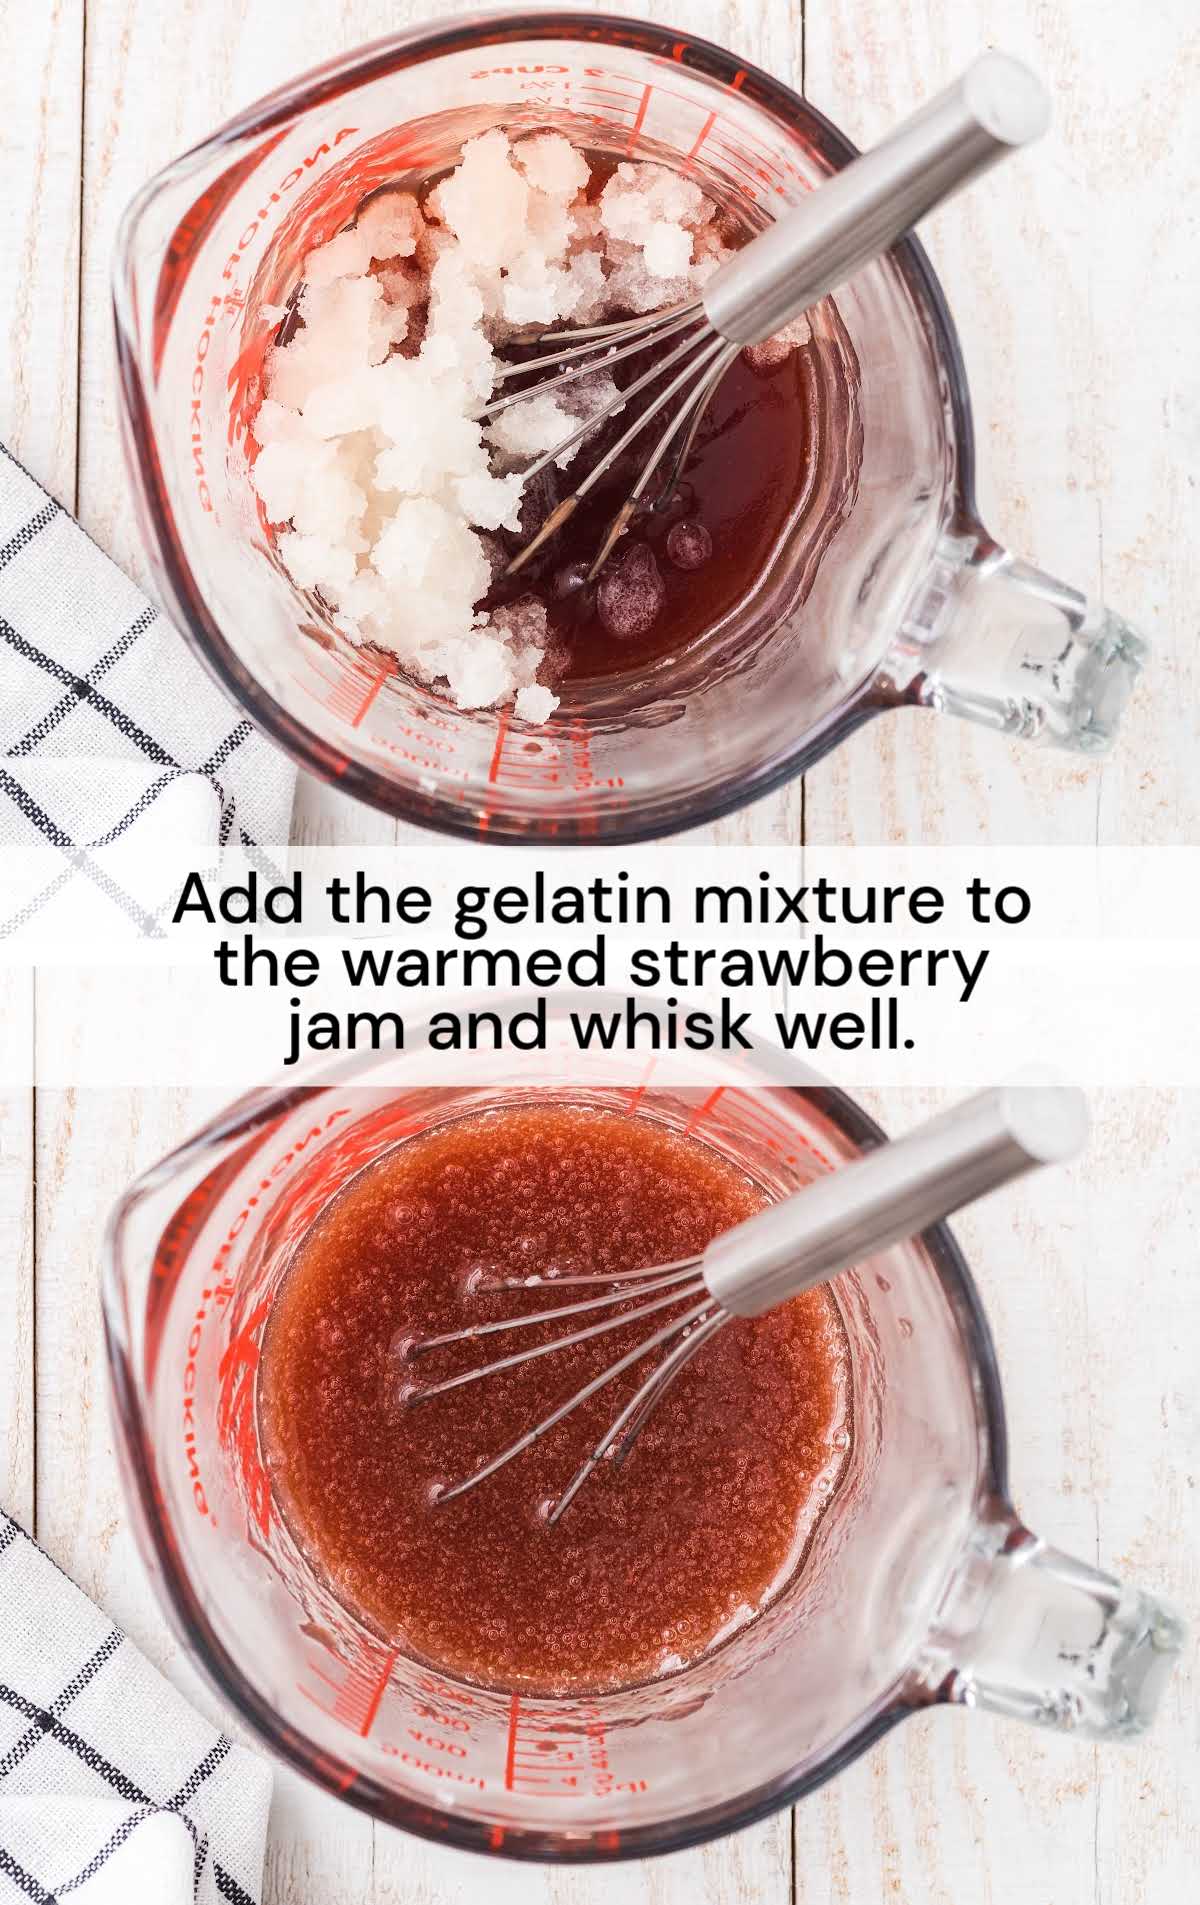 gelatin mixture combined with the warm strawberry jam and whisked together